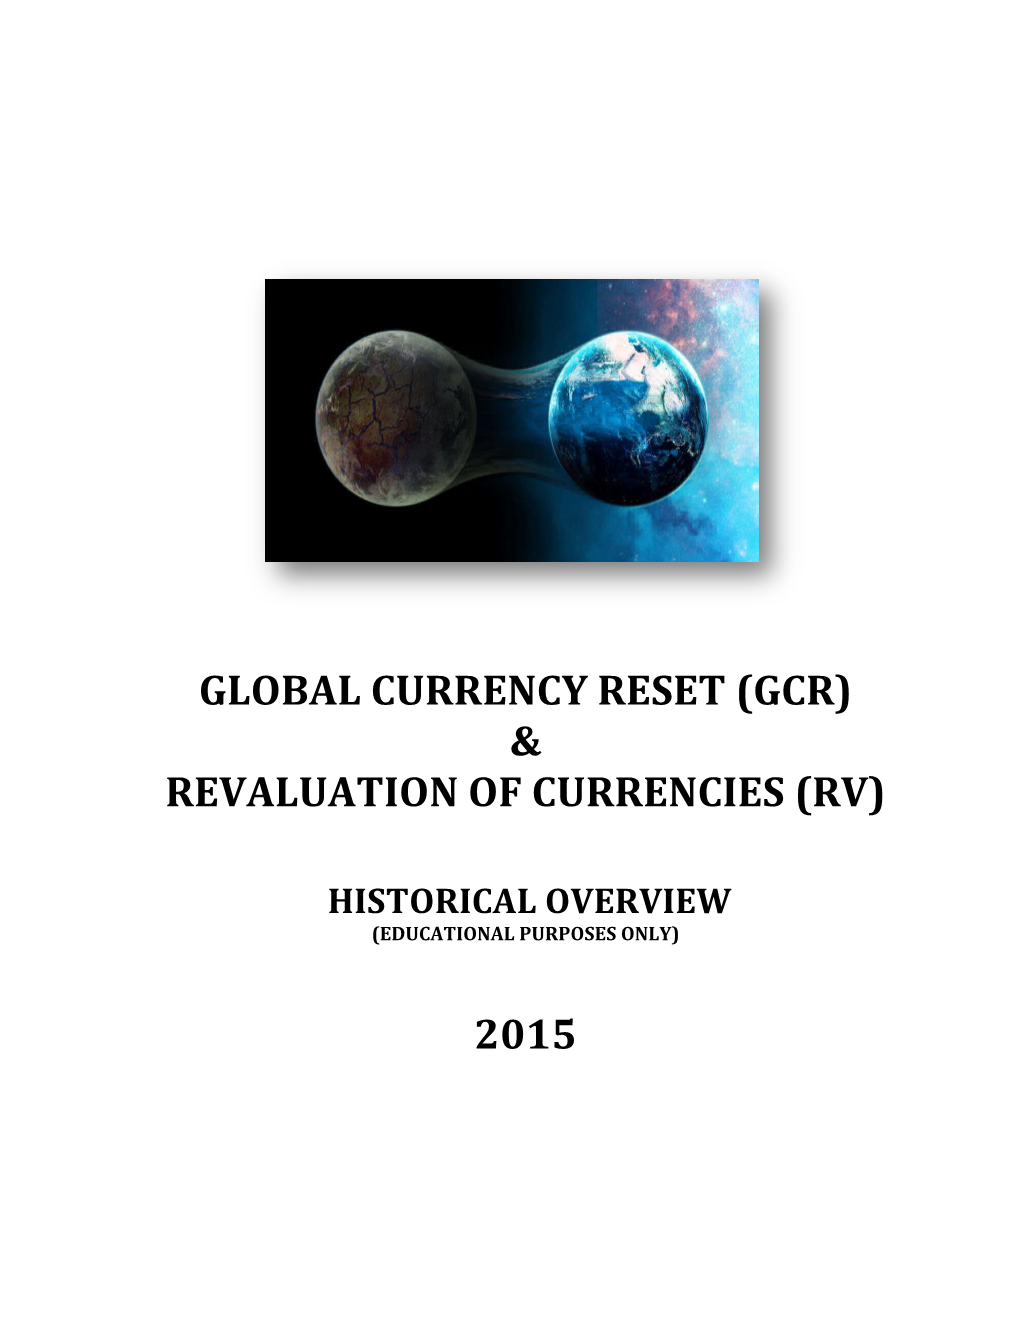 Global Currency Reset (Gcr) & Revaluation of Currencies (Rv)